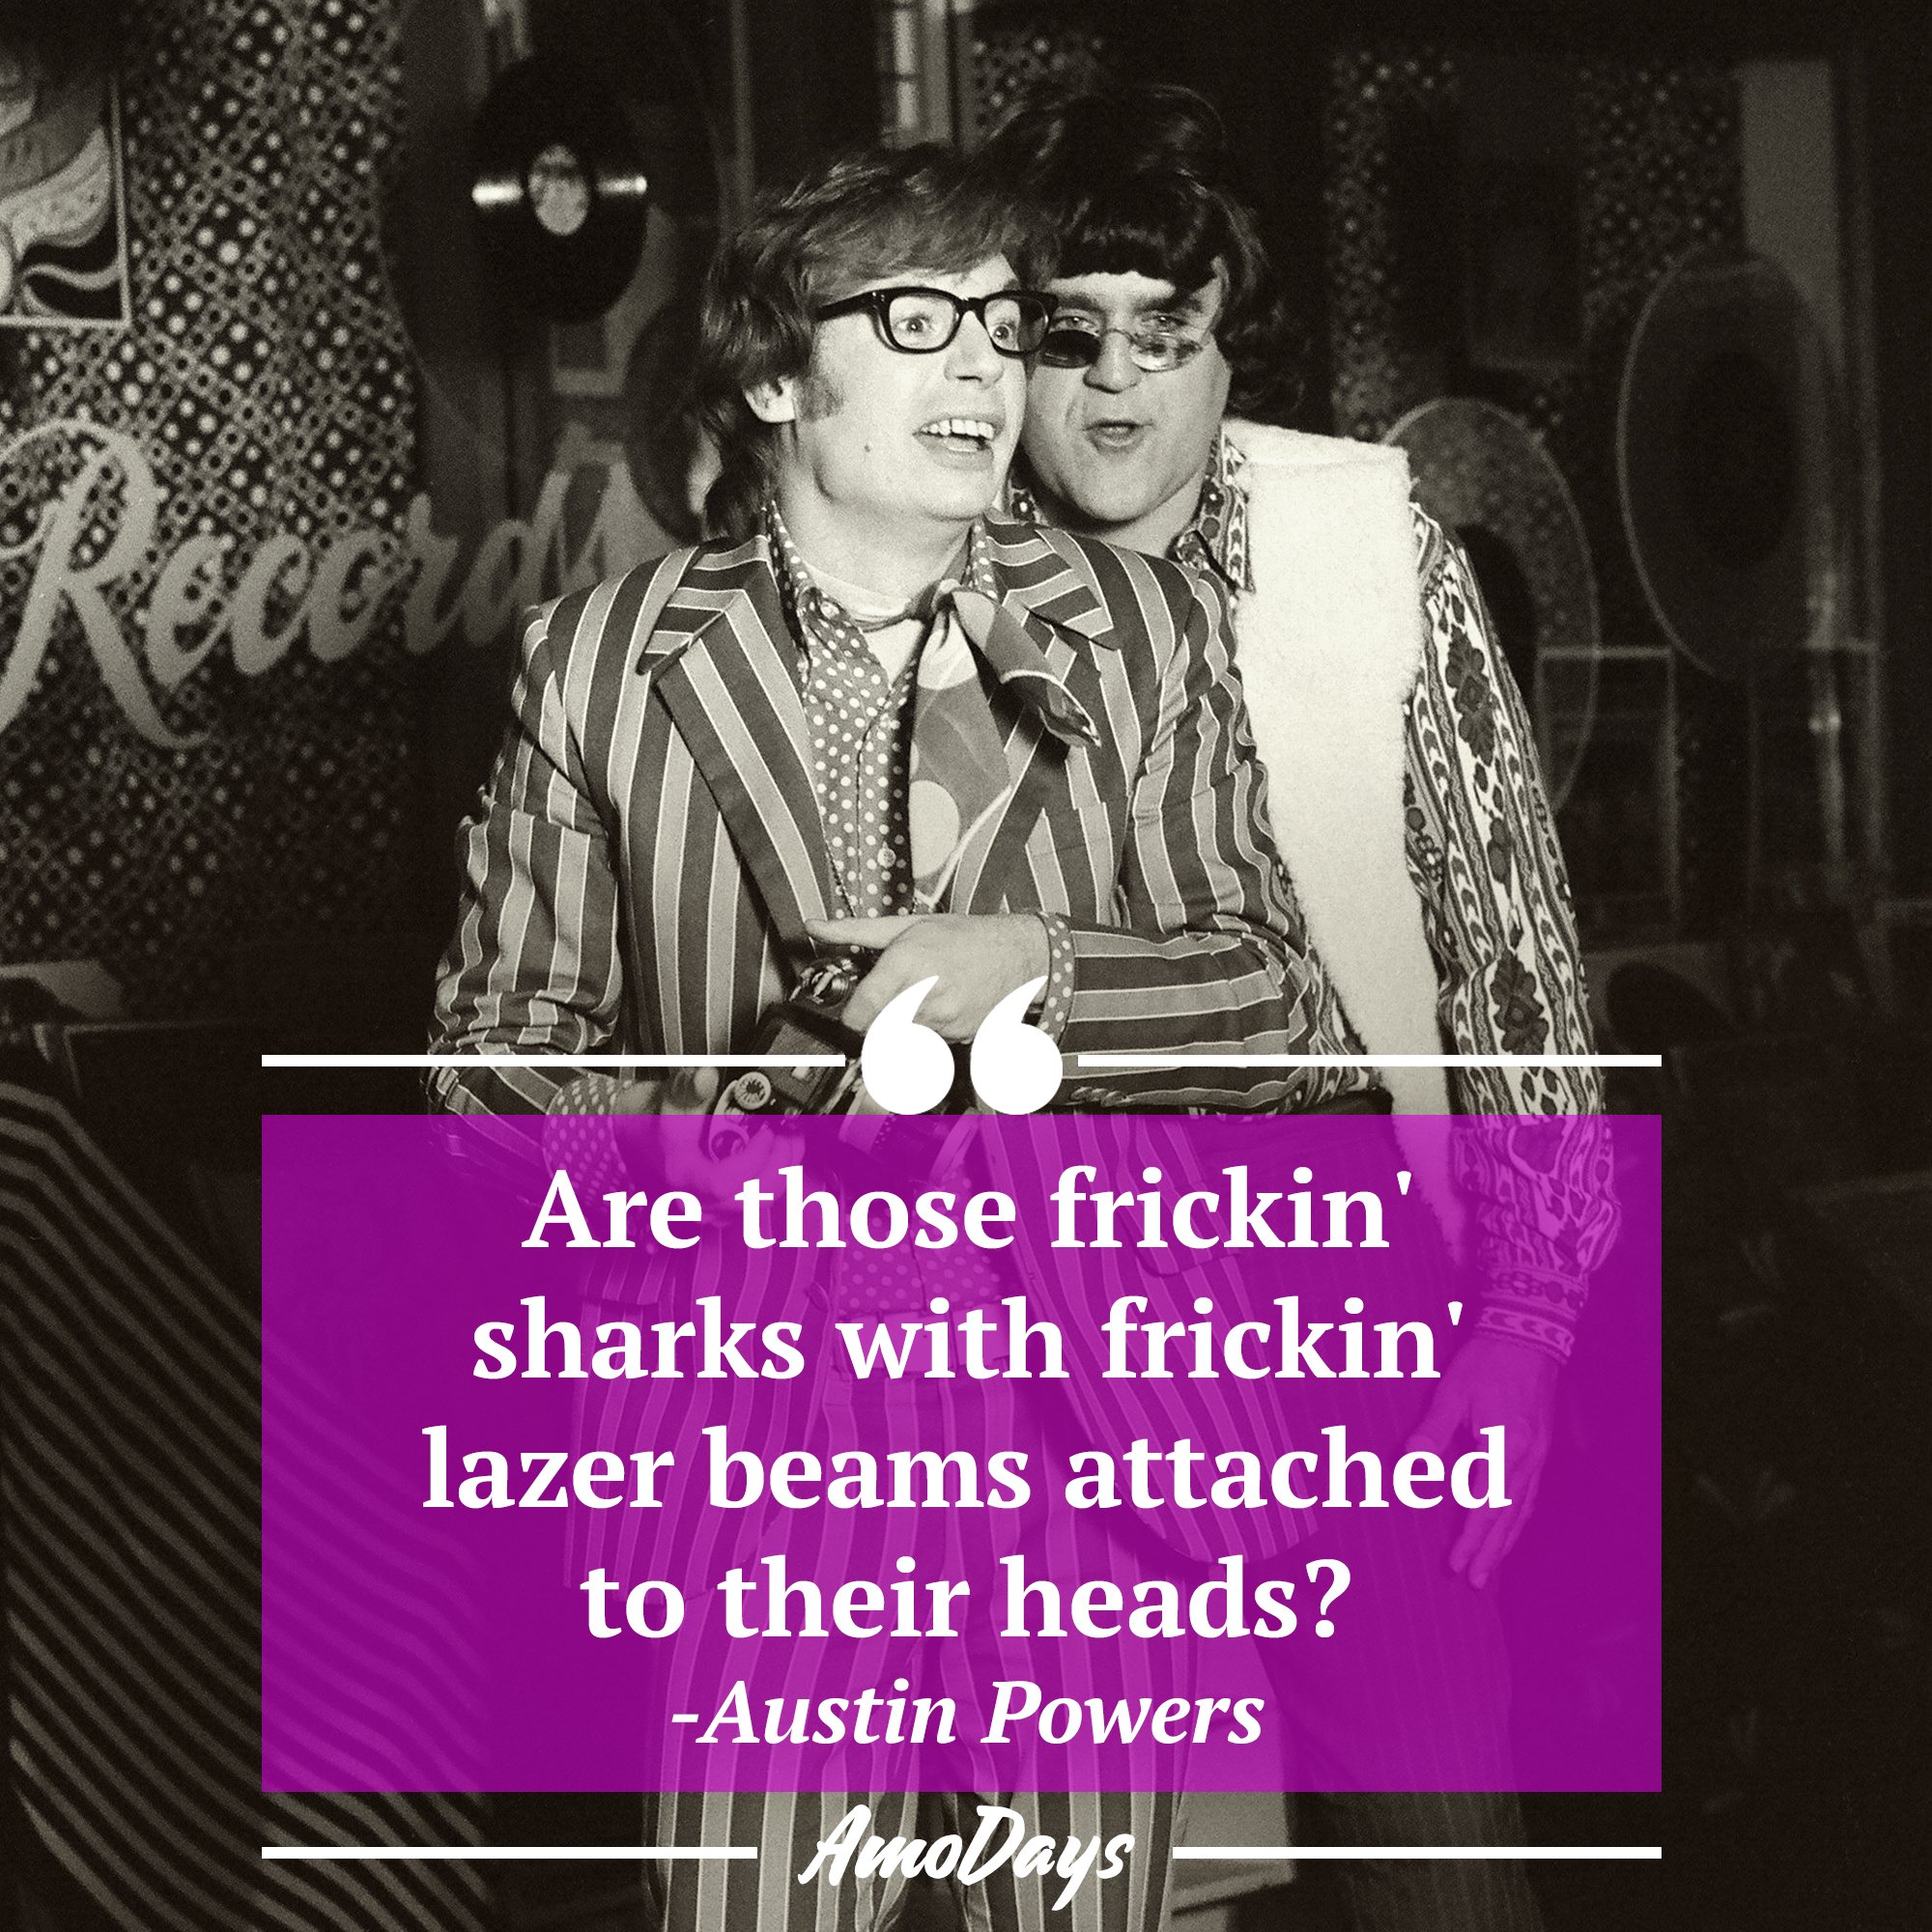 Austin Powers's quote: "Are those frickin' sharks with frickin' lazer beams attached to their heads?" | Image: AmoDays